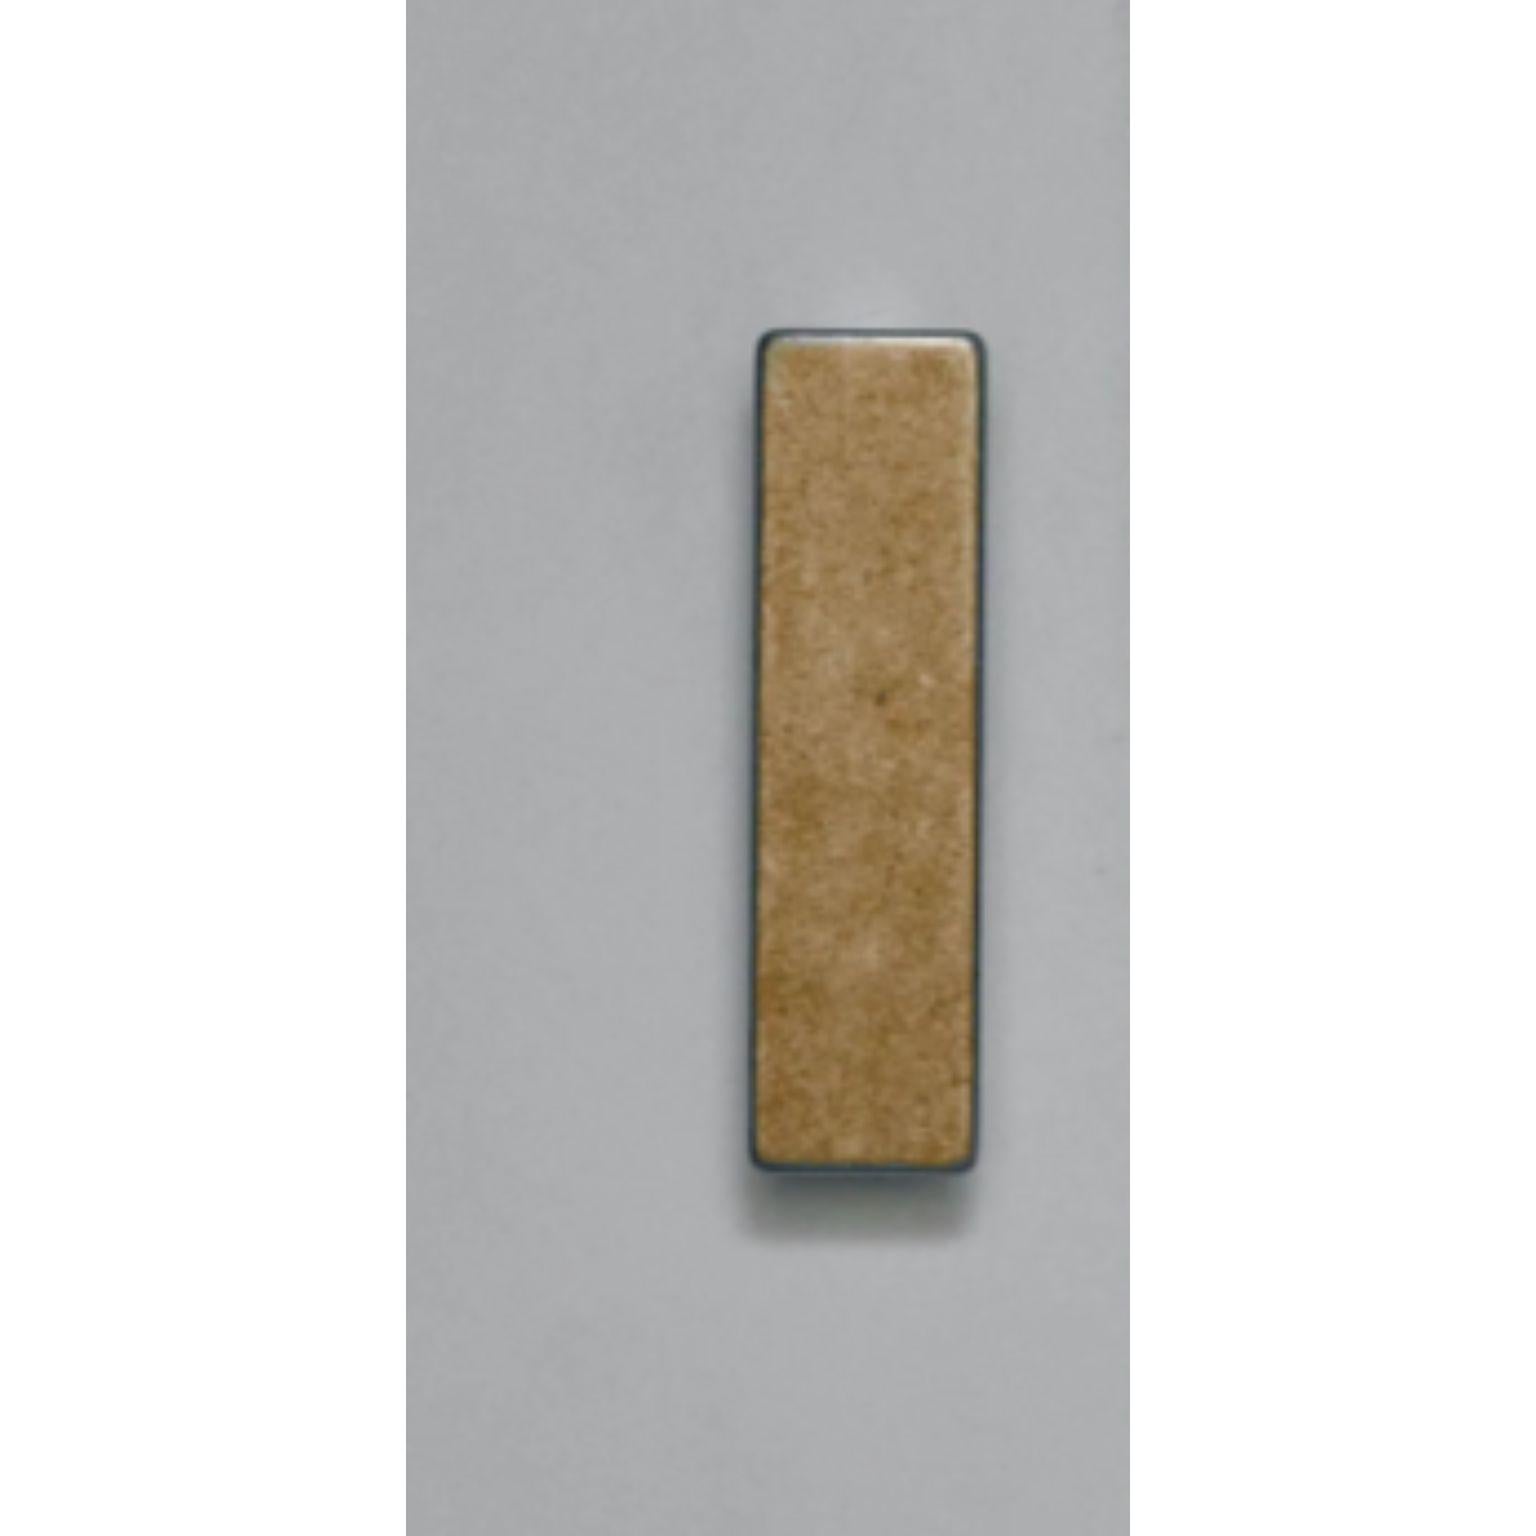 Brass Brute Handle by Henry Wilson
Dimensions: W 3 x D 2 x H 10 cm
Materials: Brass

This versatile handle can be used for cabinetry, sliding doors and sash windows. 
Each piece is sand cast and rumbled finished.
Brute Handles are manufactured in